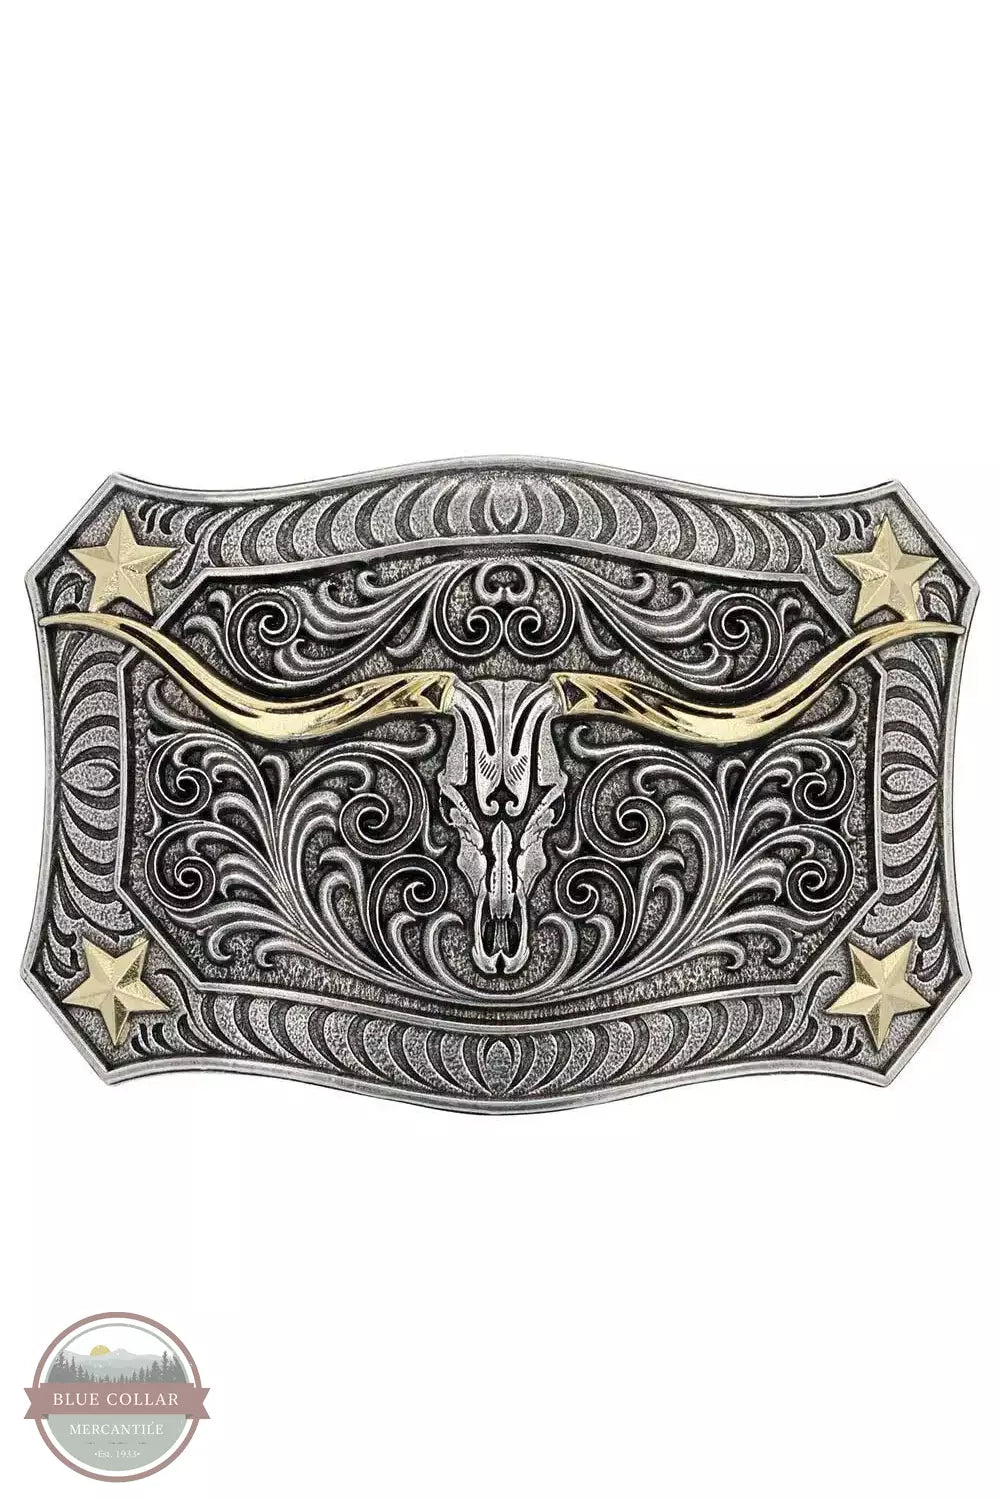 Montana Silversmith A935 Longhorn Crest Filigree Attitude Buckle Front View